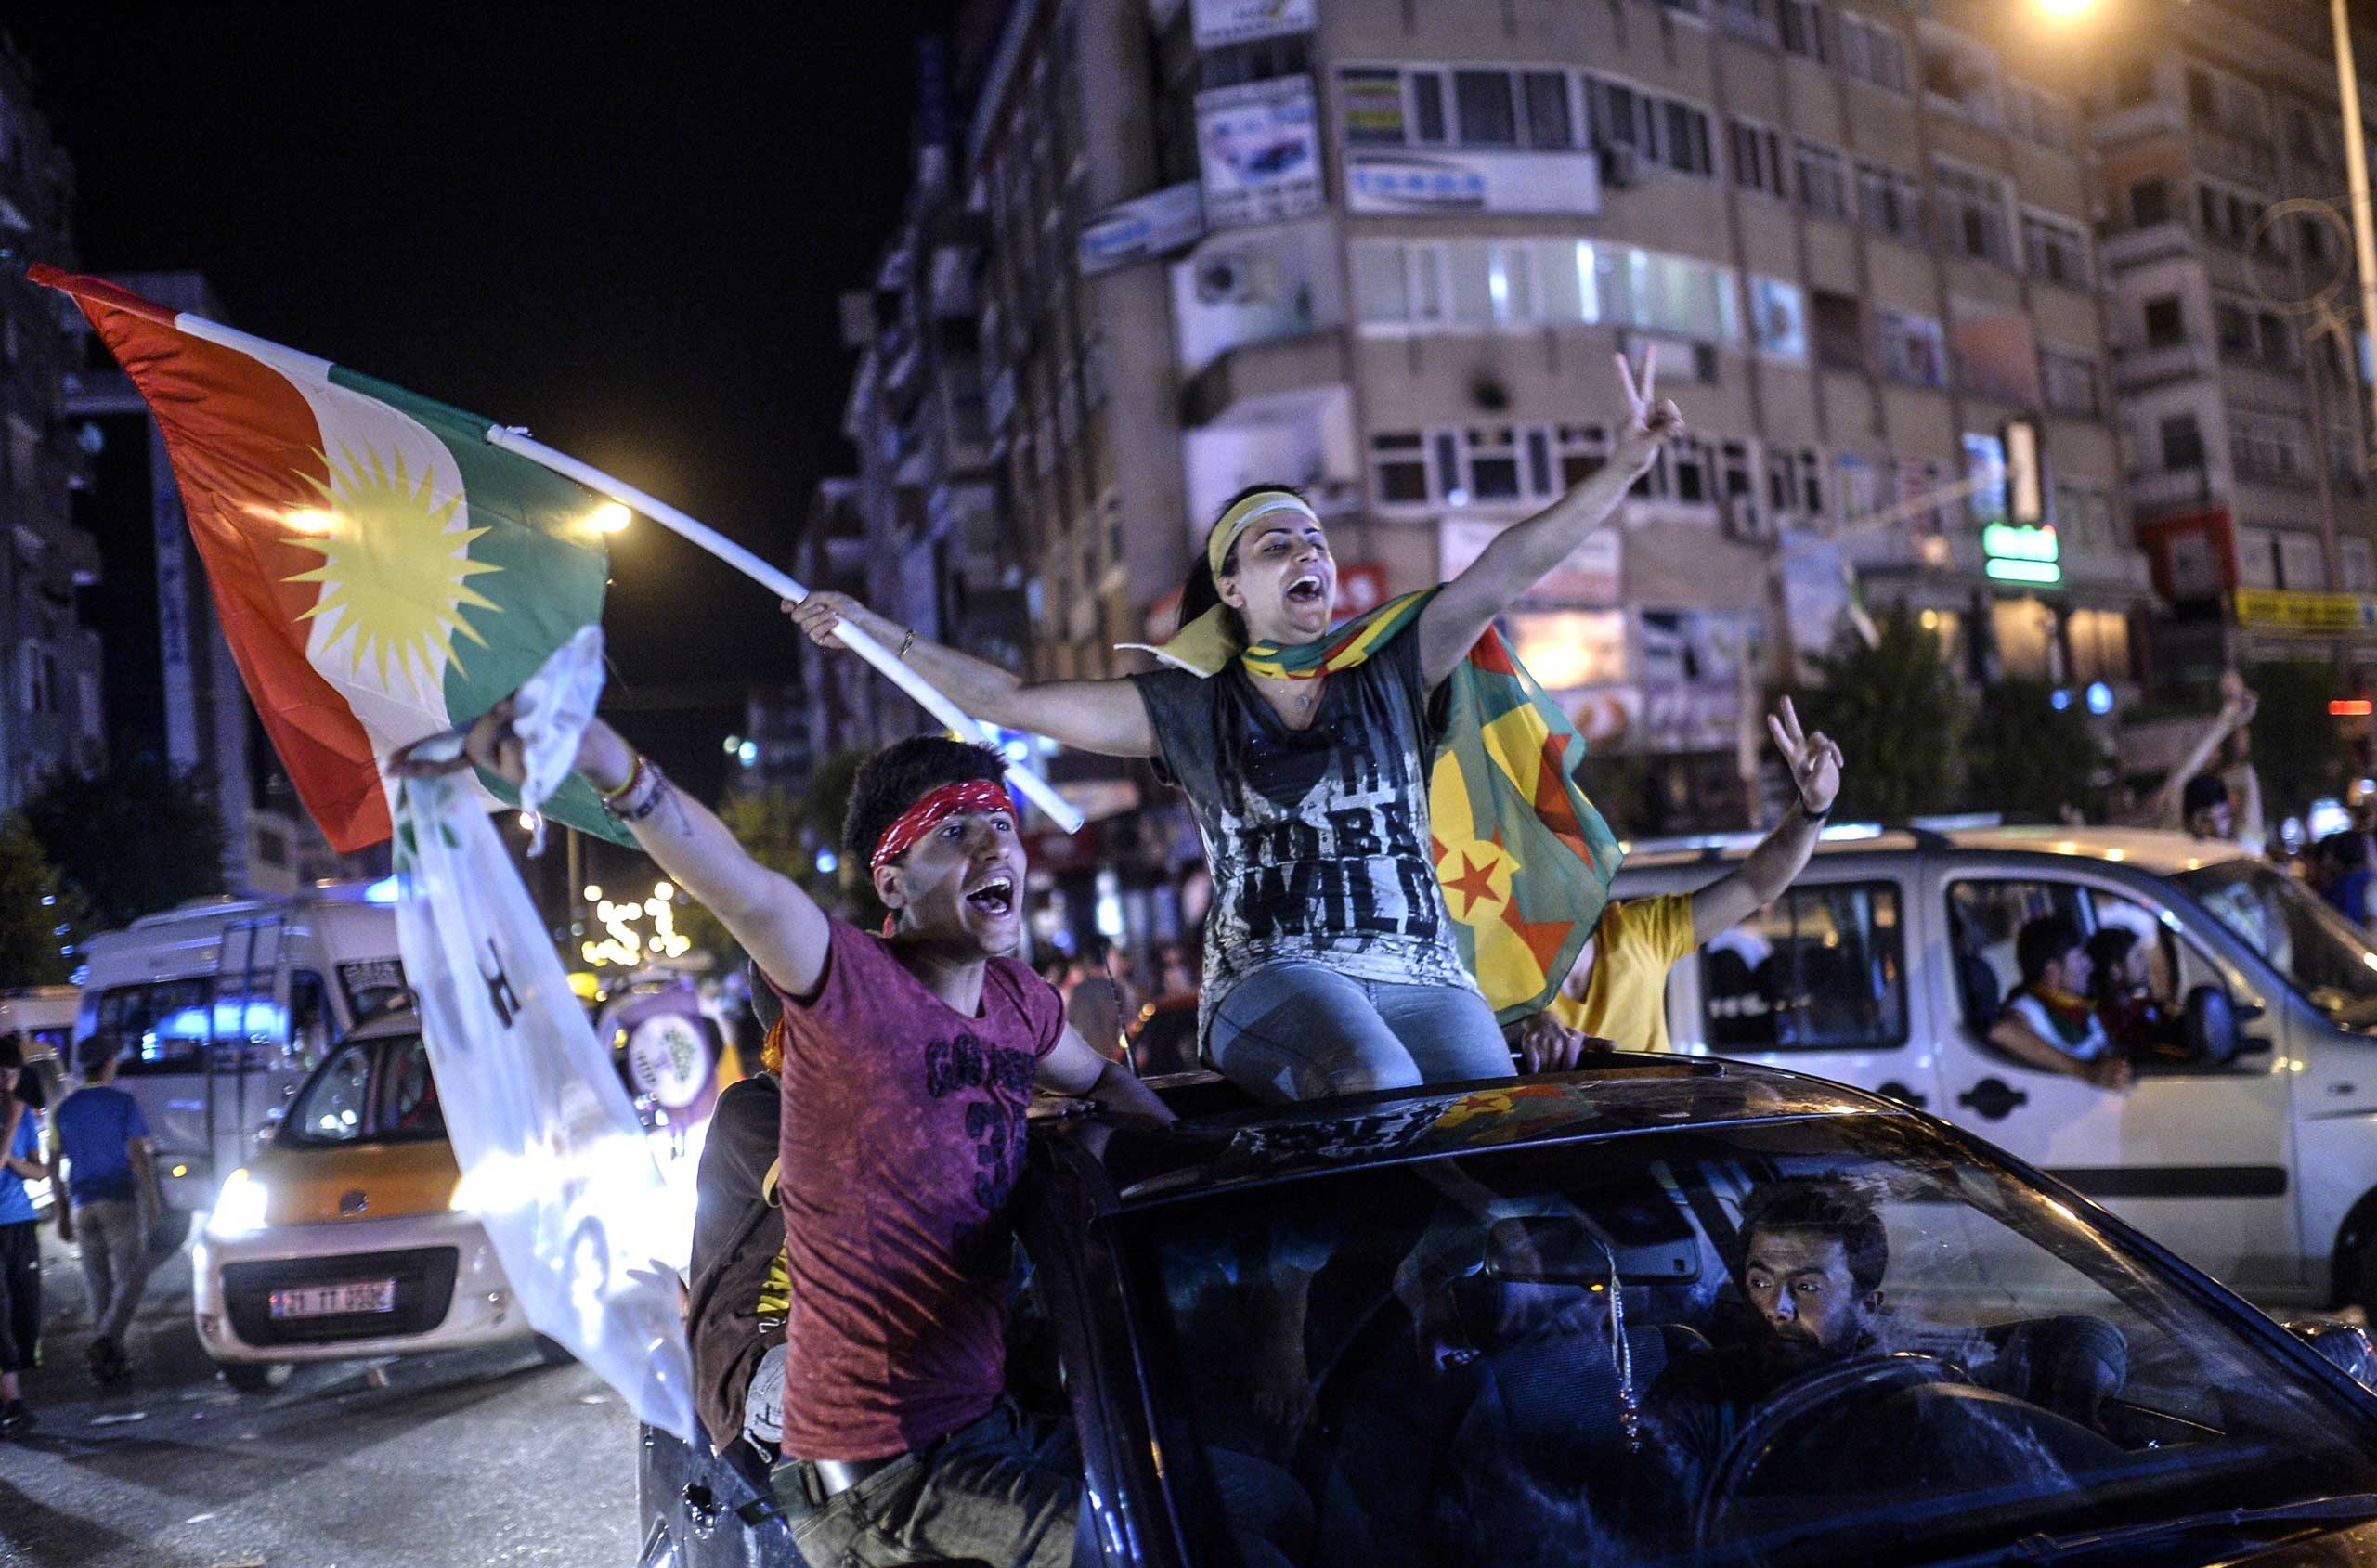 Young supporters of pro-Kurdish Peoples' Democratic Party (HDP) hold Kurdish flags as they celebrate the results of the legislative election, in Diyarbakir in Turkey on June 7, 2015. (Bulent Kilic—AFP/Getty Images)